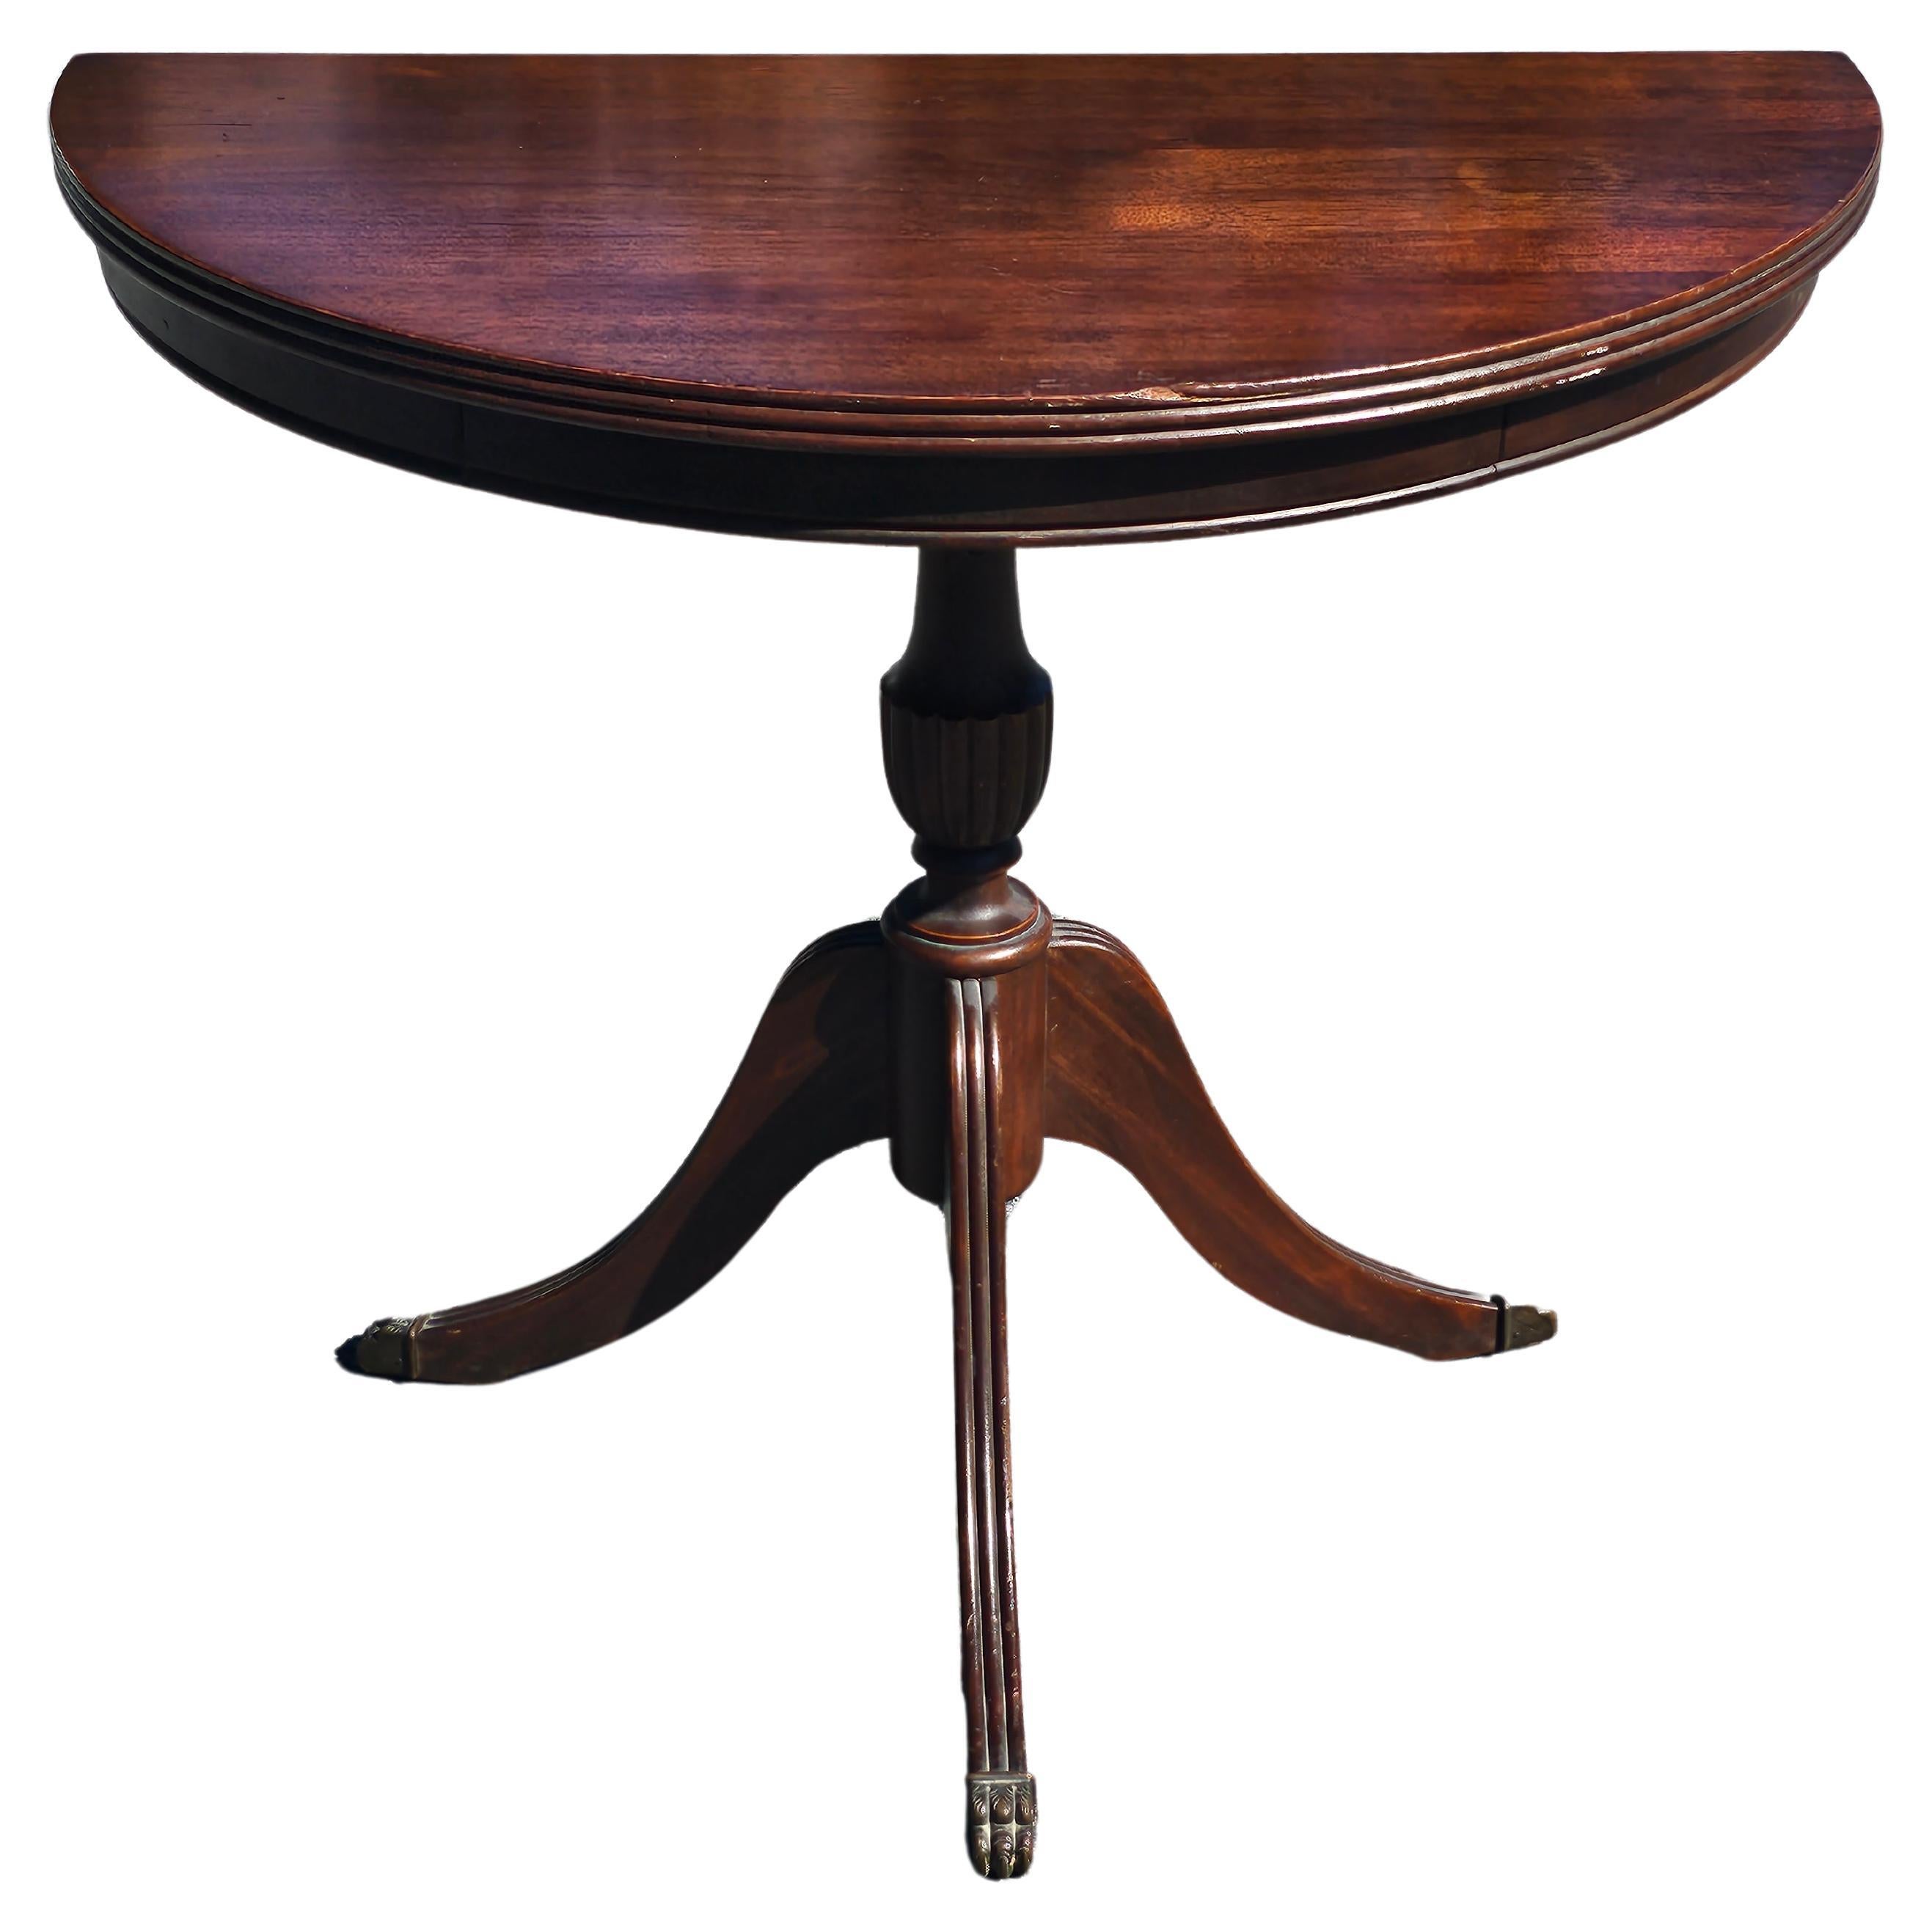 Woodwork Early 20th Century Federal Mahogany Pedestal Trifid Demilune Table For Sale